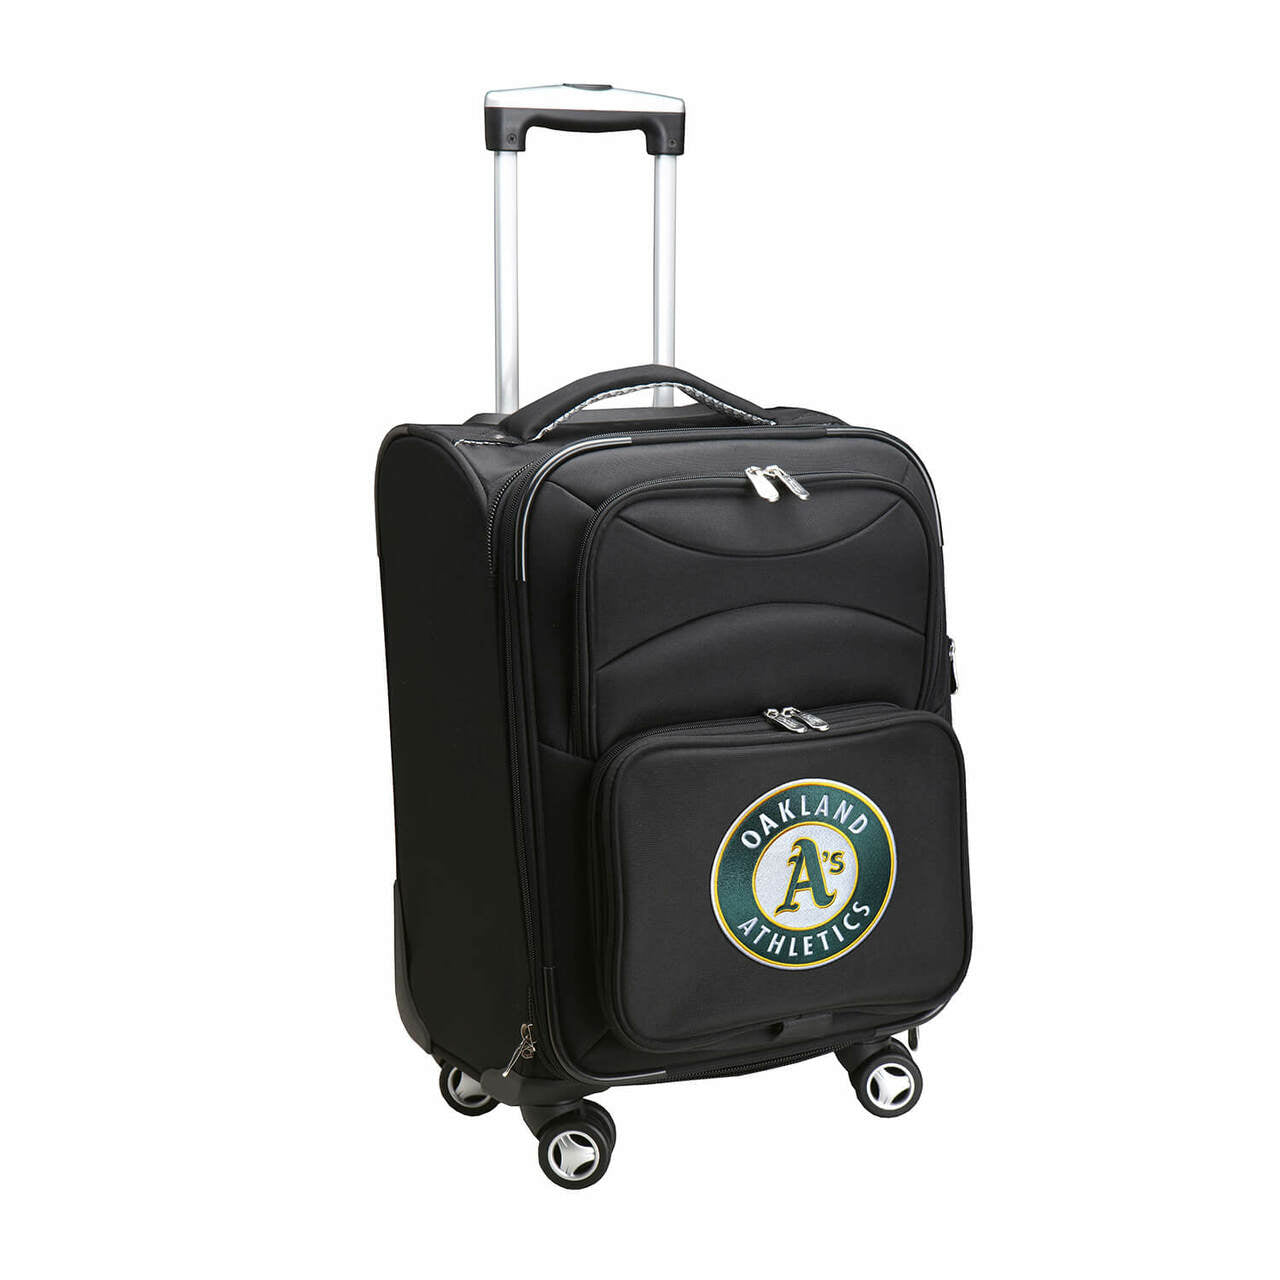 A's Luggage | Oakland A's 20" Carry-on Spinner Luggage